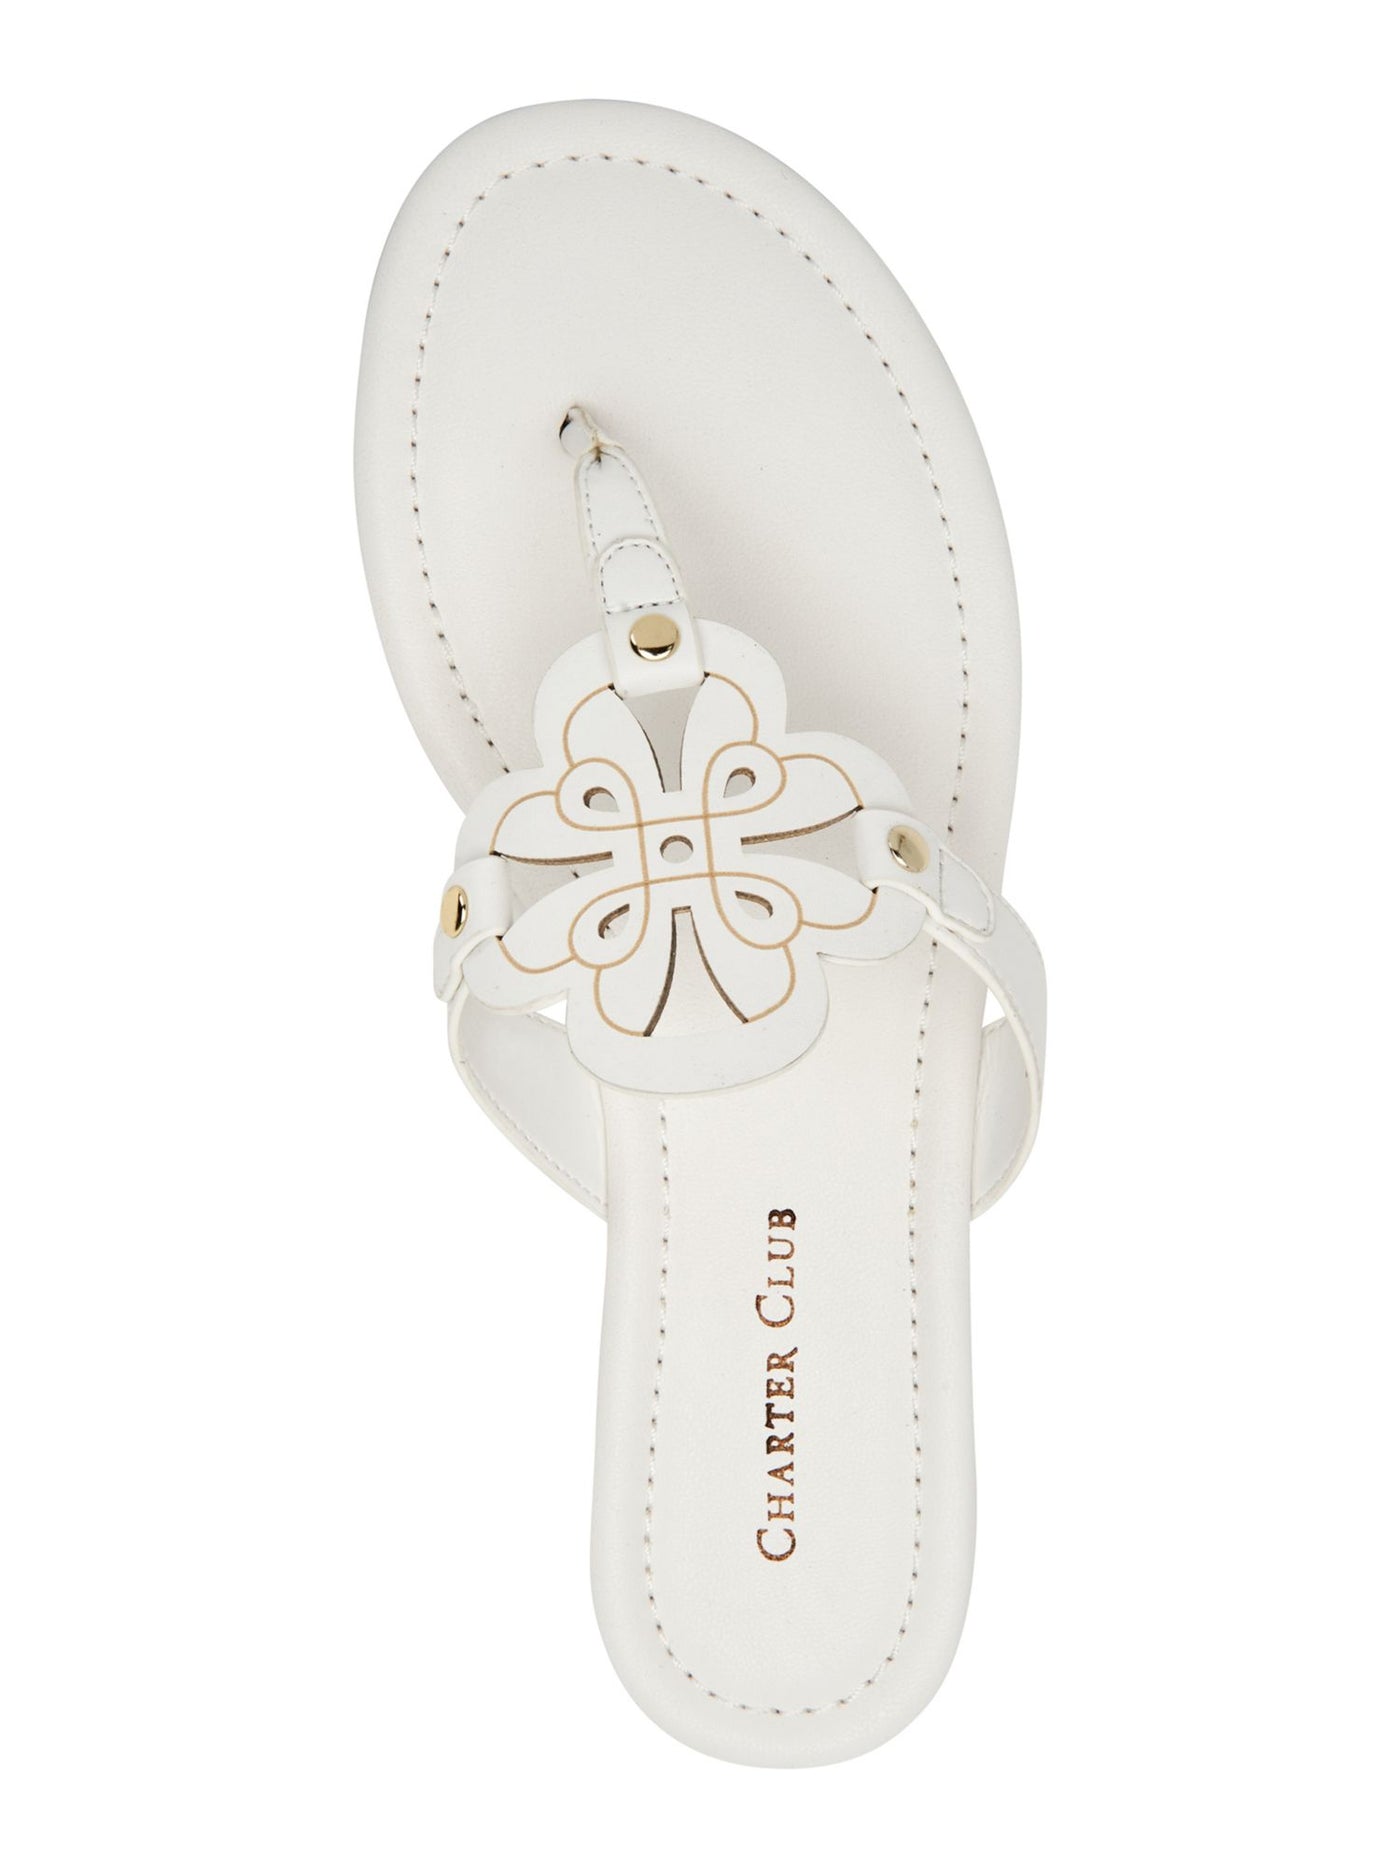 CHARTER CLUB Womens White Cut Out Studded Padded Ozella Round Toe Wedge Slip On Flip Flop Sandal 6.5 M